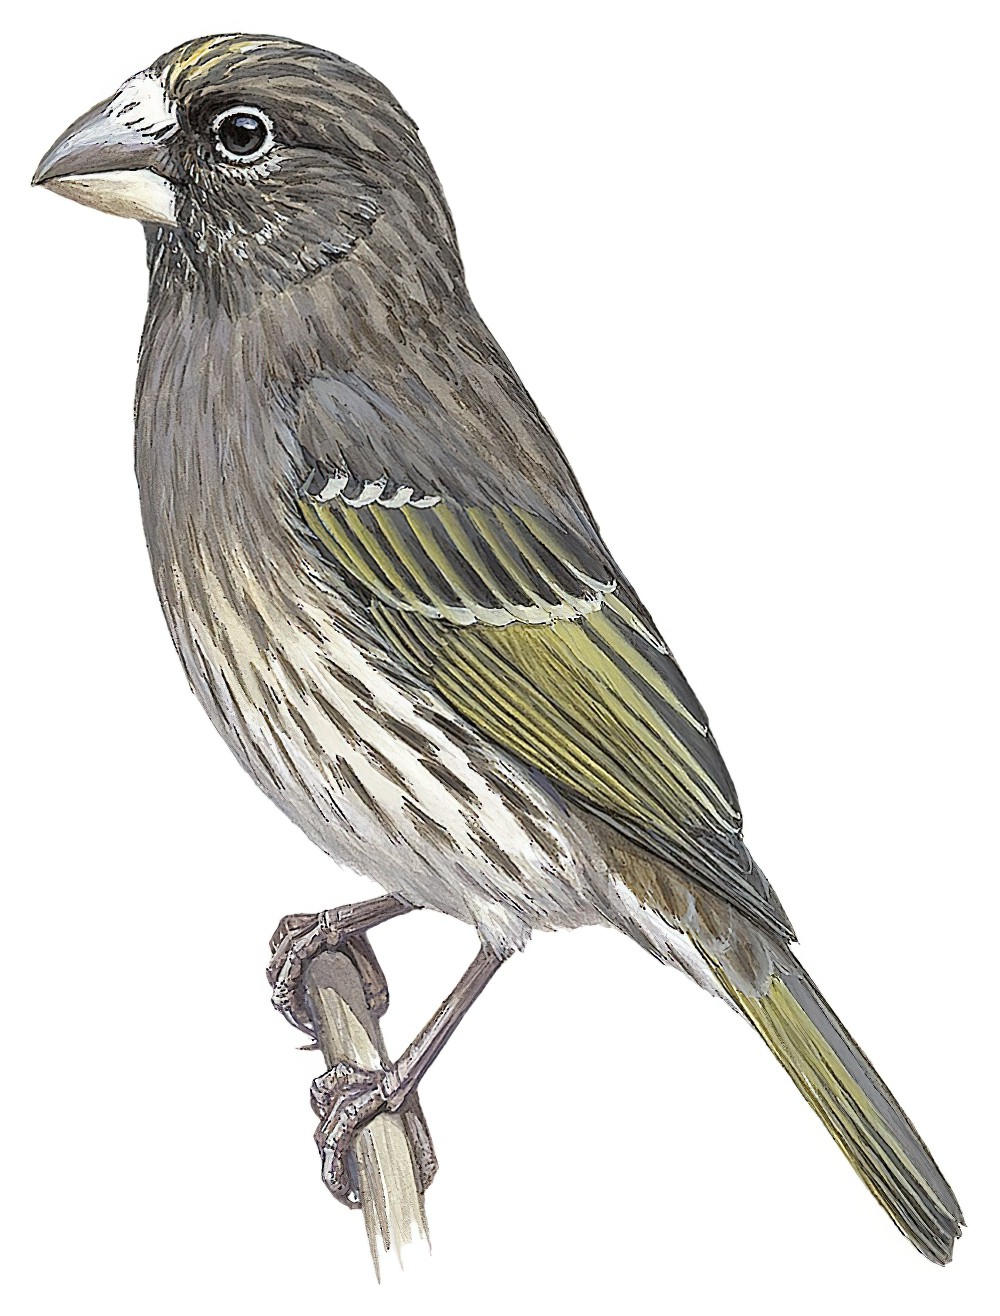 Thick-billed Seedeater / Crithagra burtoni